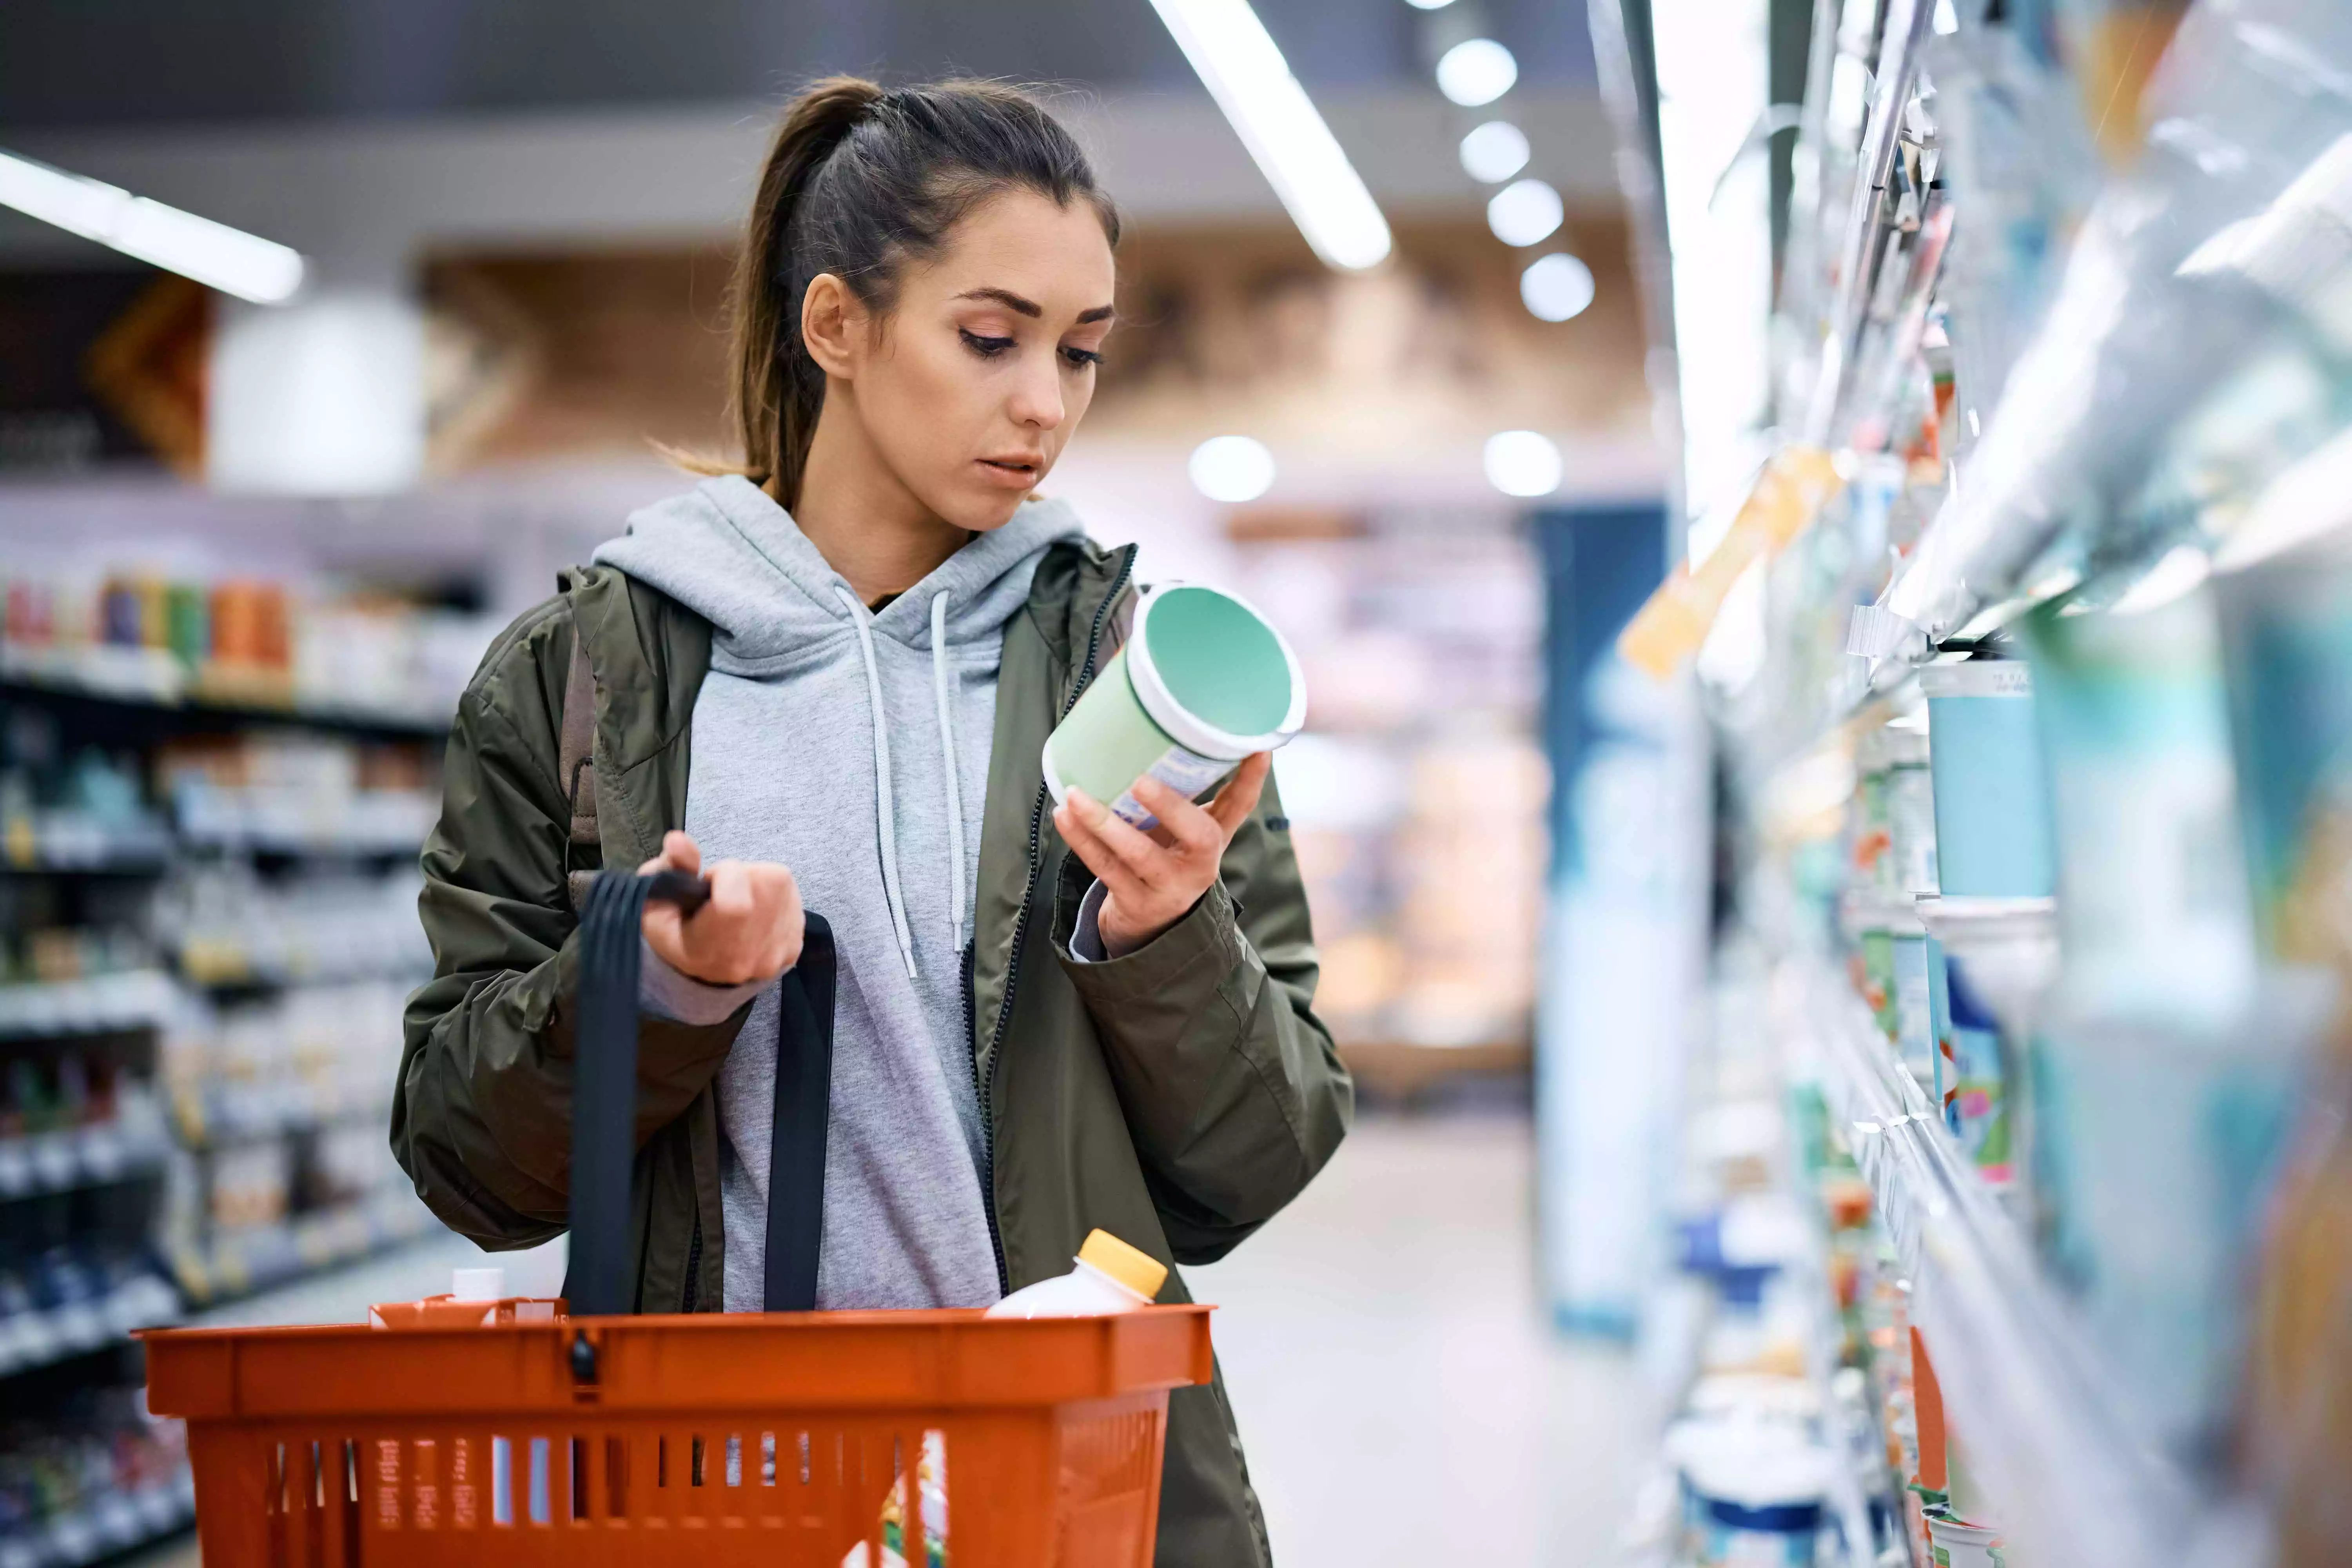 One of the food and beverage trend 2023 is clean label in product packaging